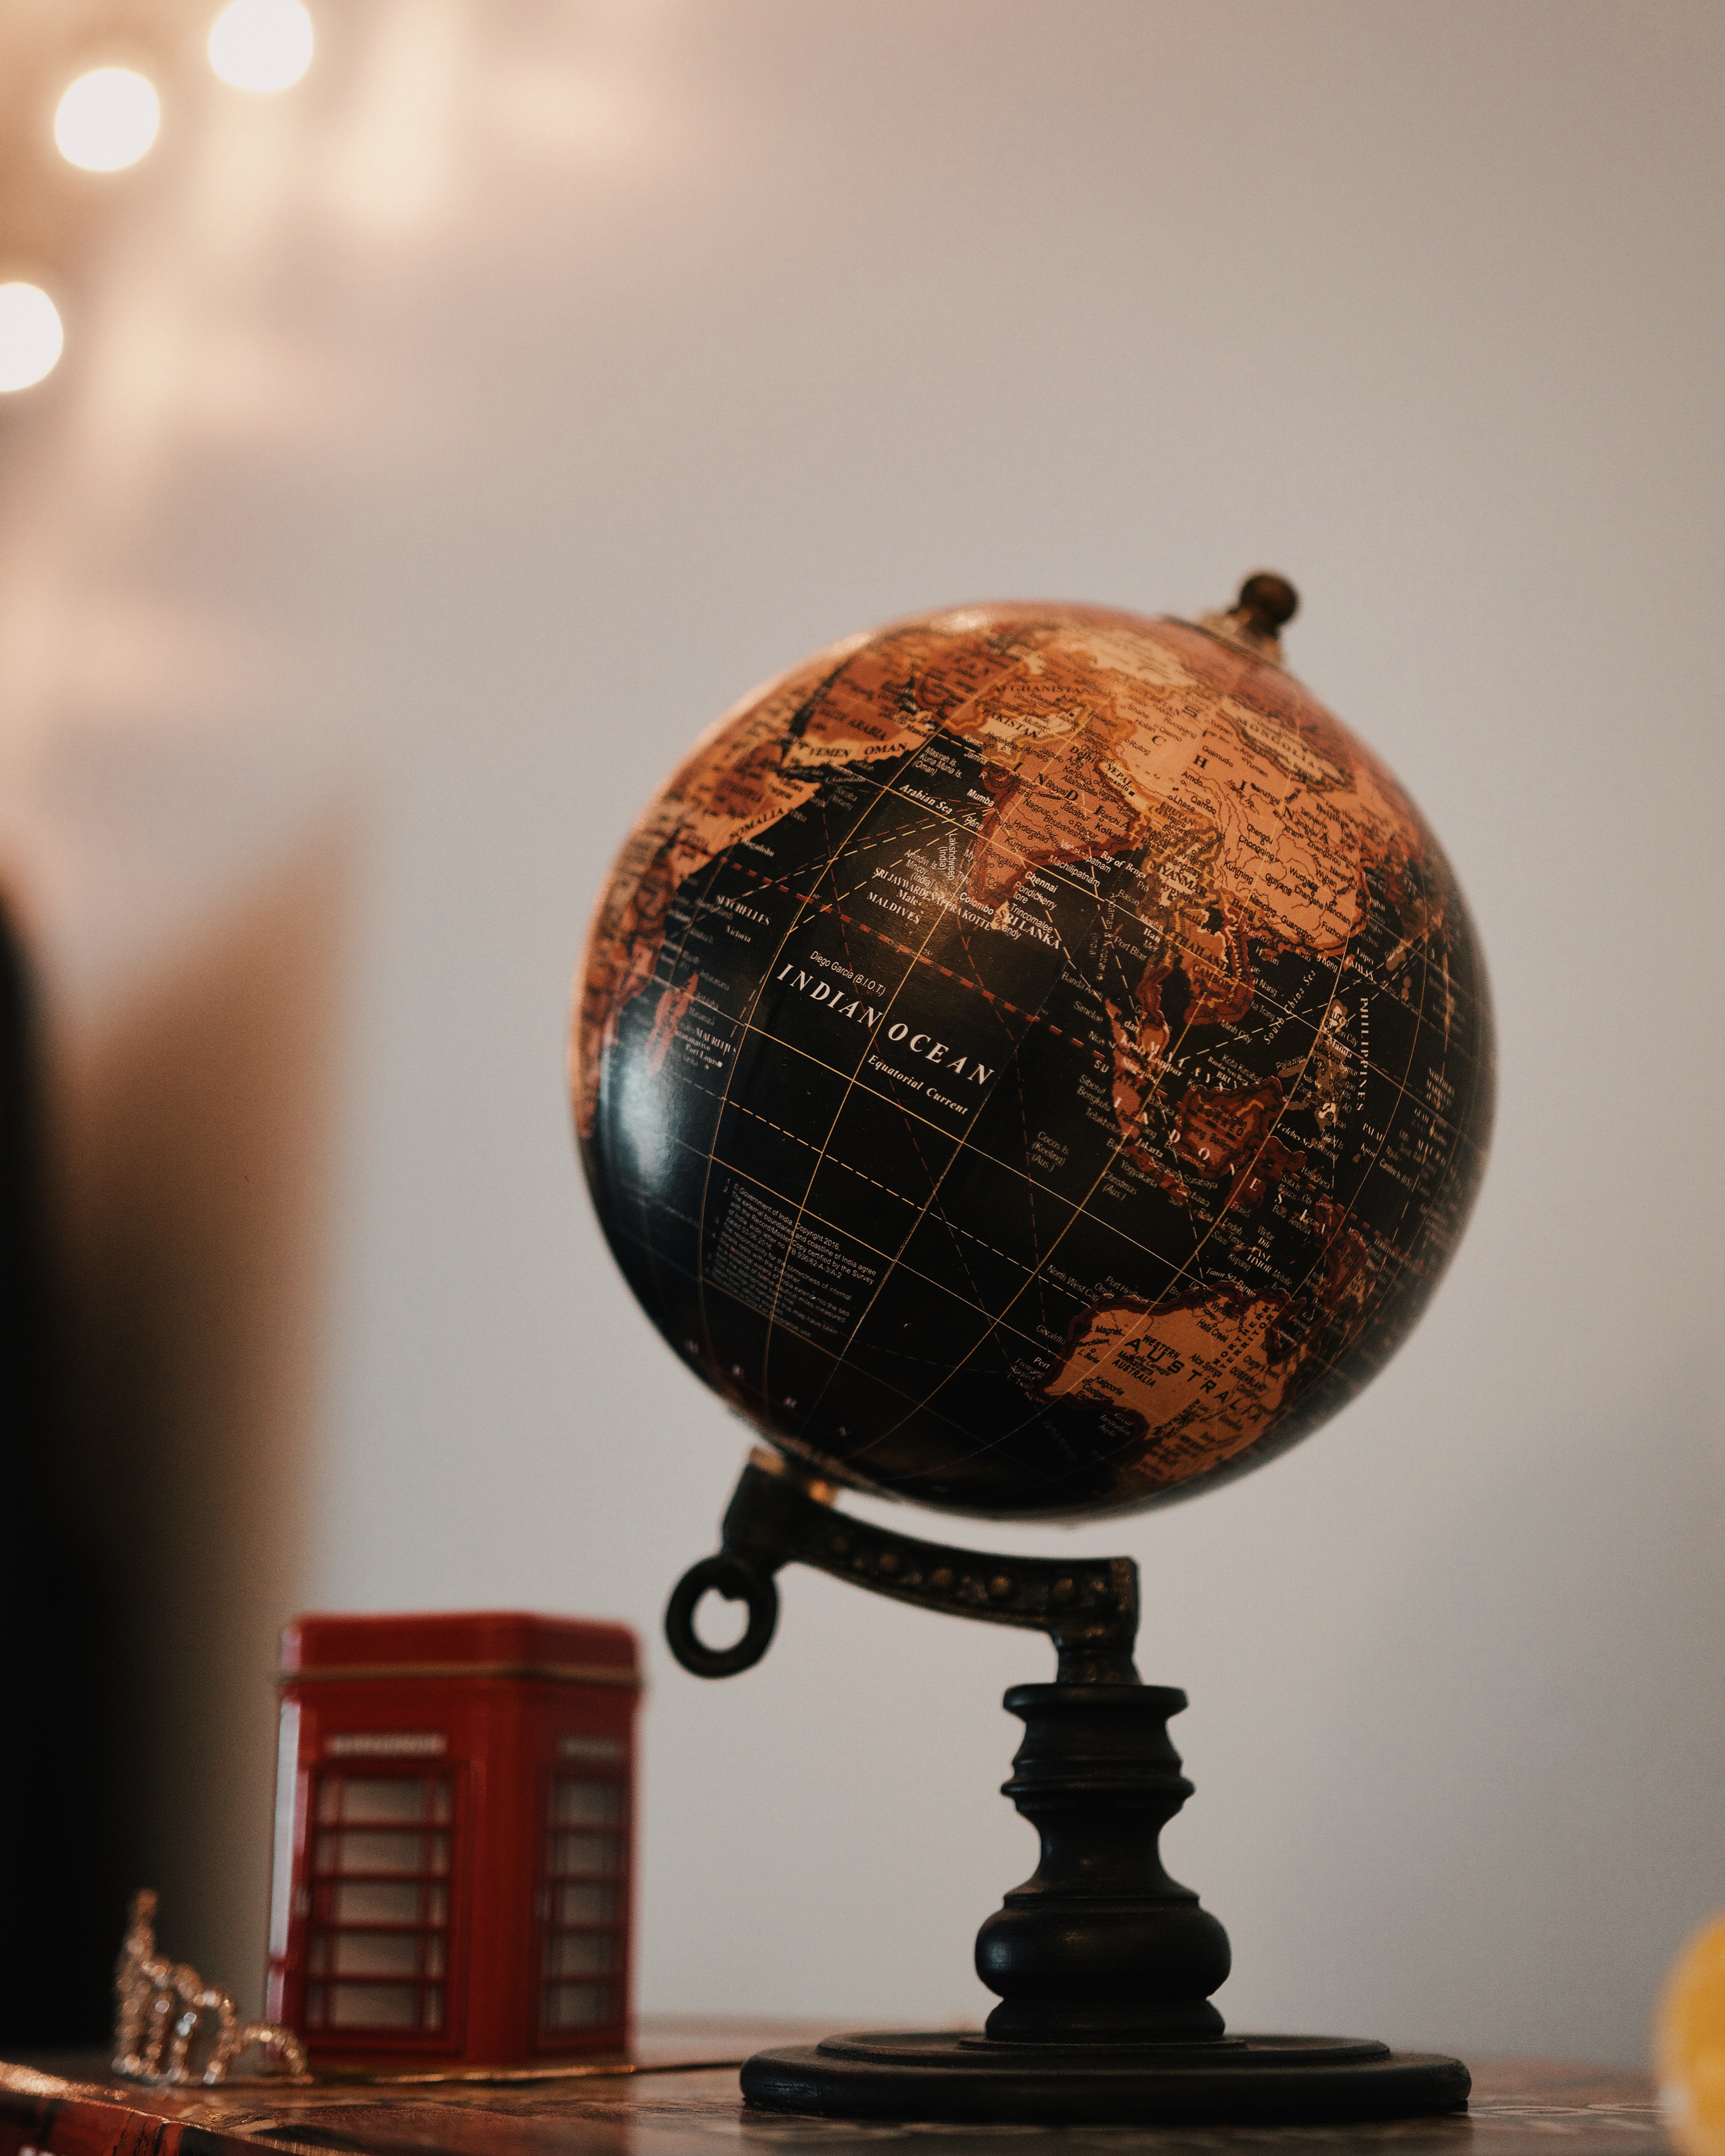 geography, globe, miscellanea, earth, map, miscellaneous, land, ball, sphere